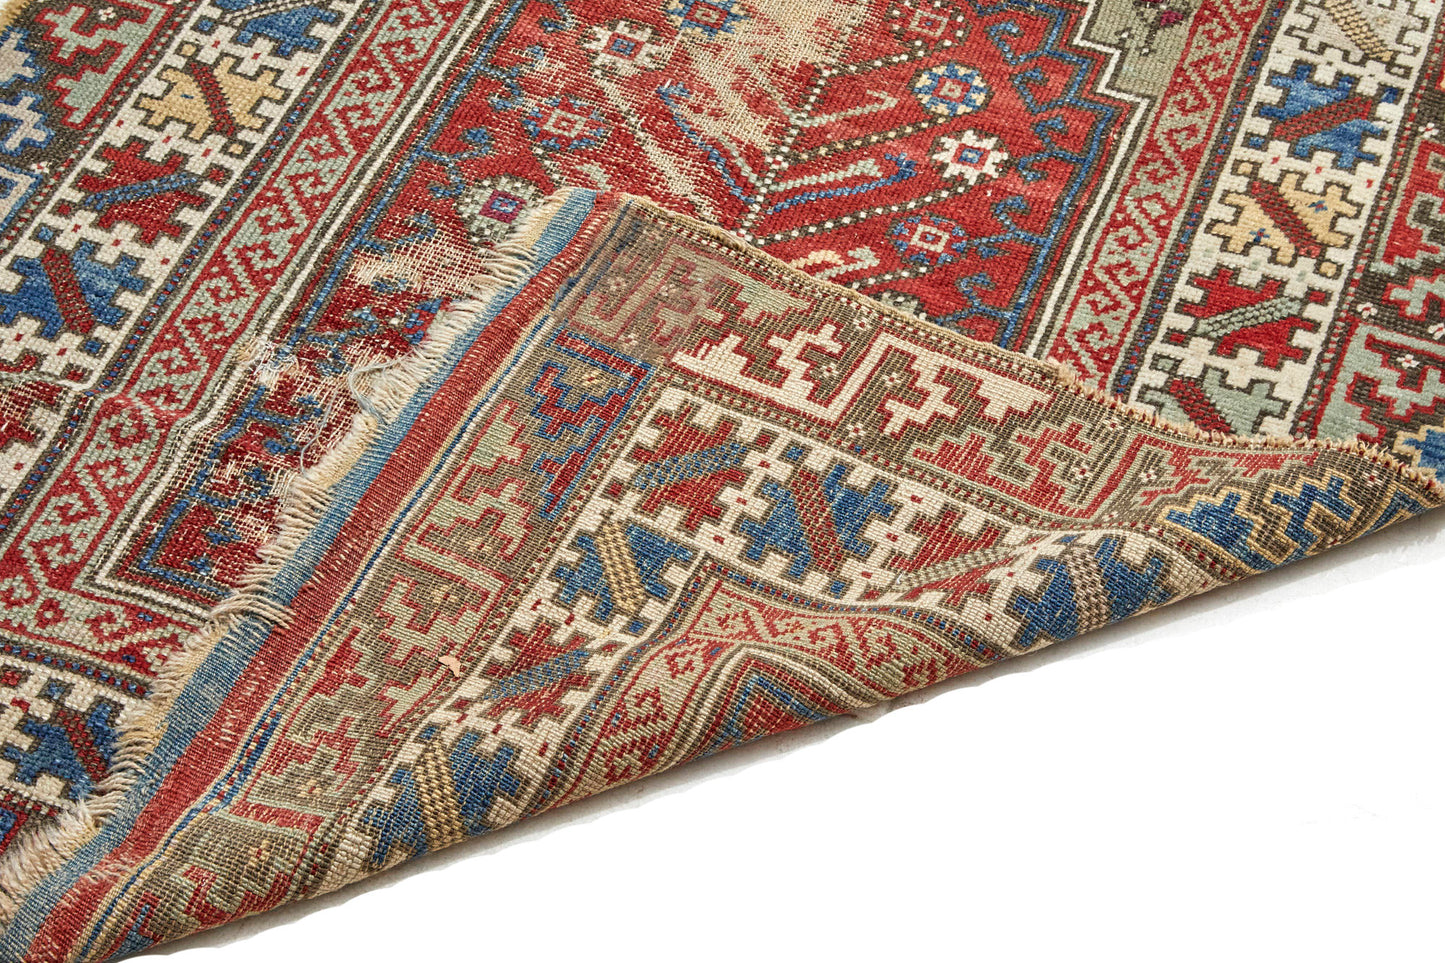 hand woven antique Persian Prayer rug with red, green, blue, white and yellow weaving - Available from King Kennedy Rugs Los Angeles